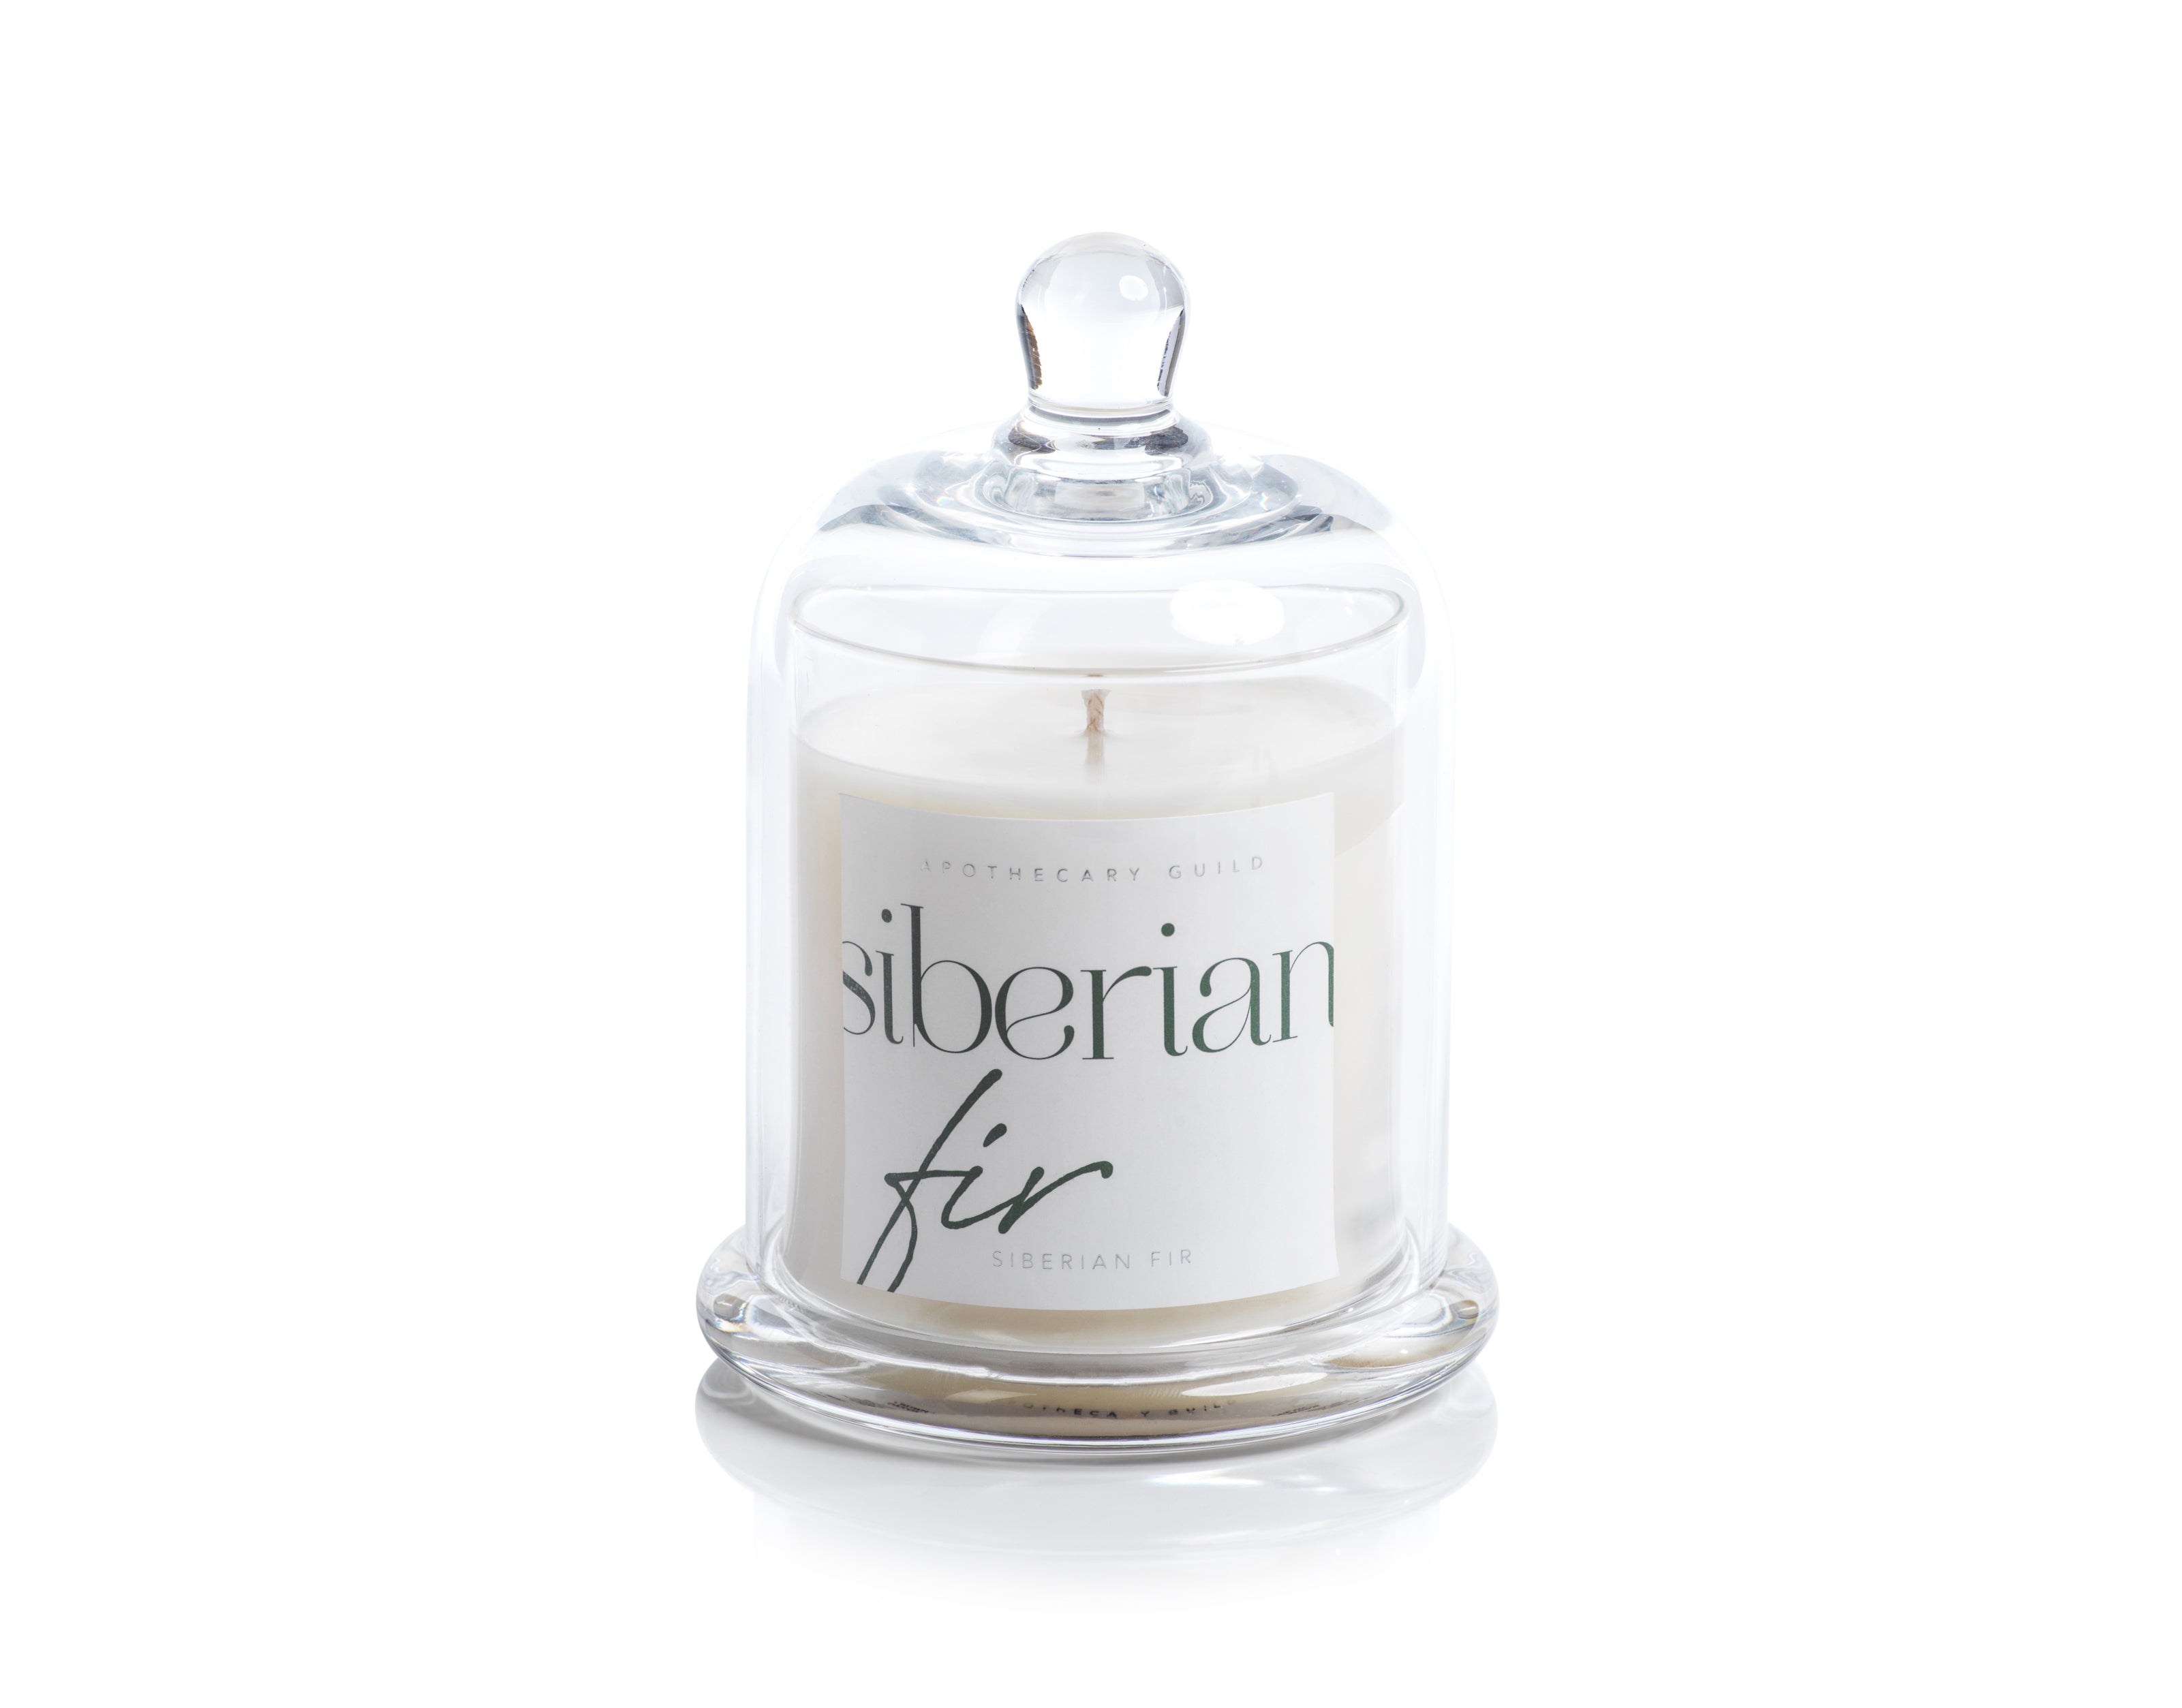 Siberian Fir Candle Dome Jar and Travel Tin - CARLYLE AVENUE